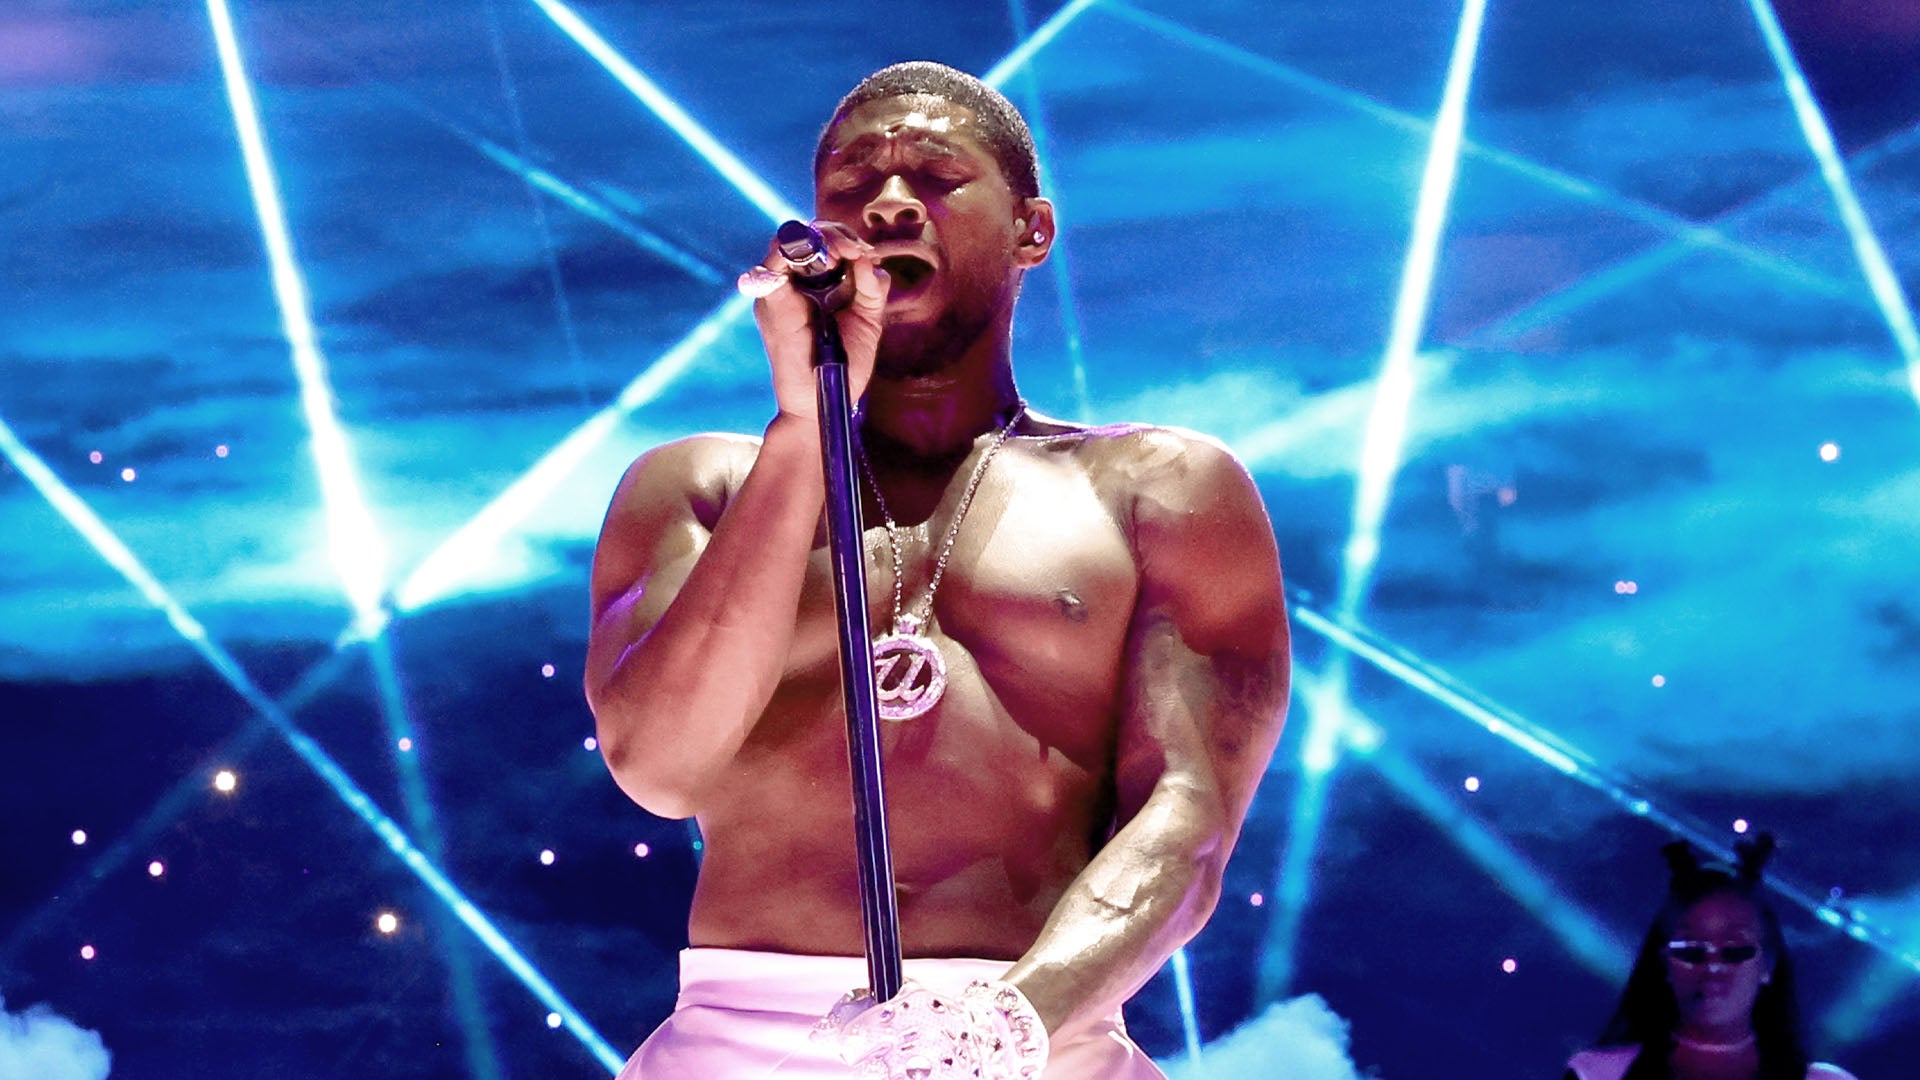 Watch Usher Strip Down During Super Bowl Halftime Show Performance